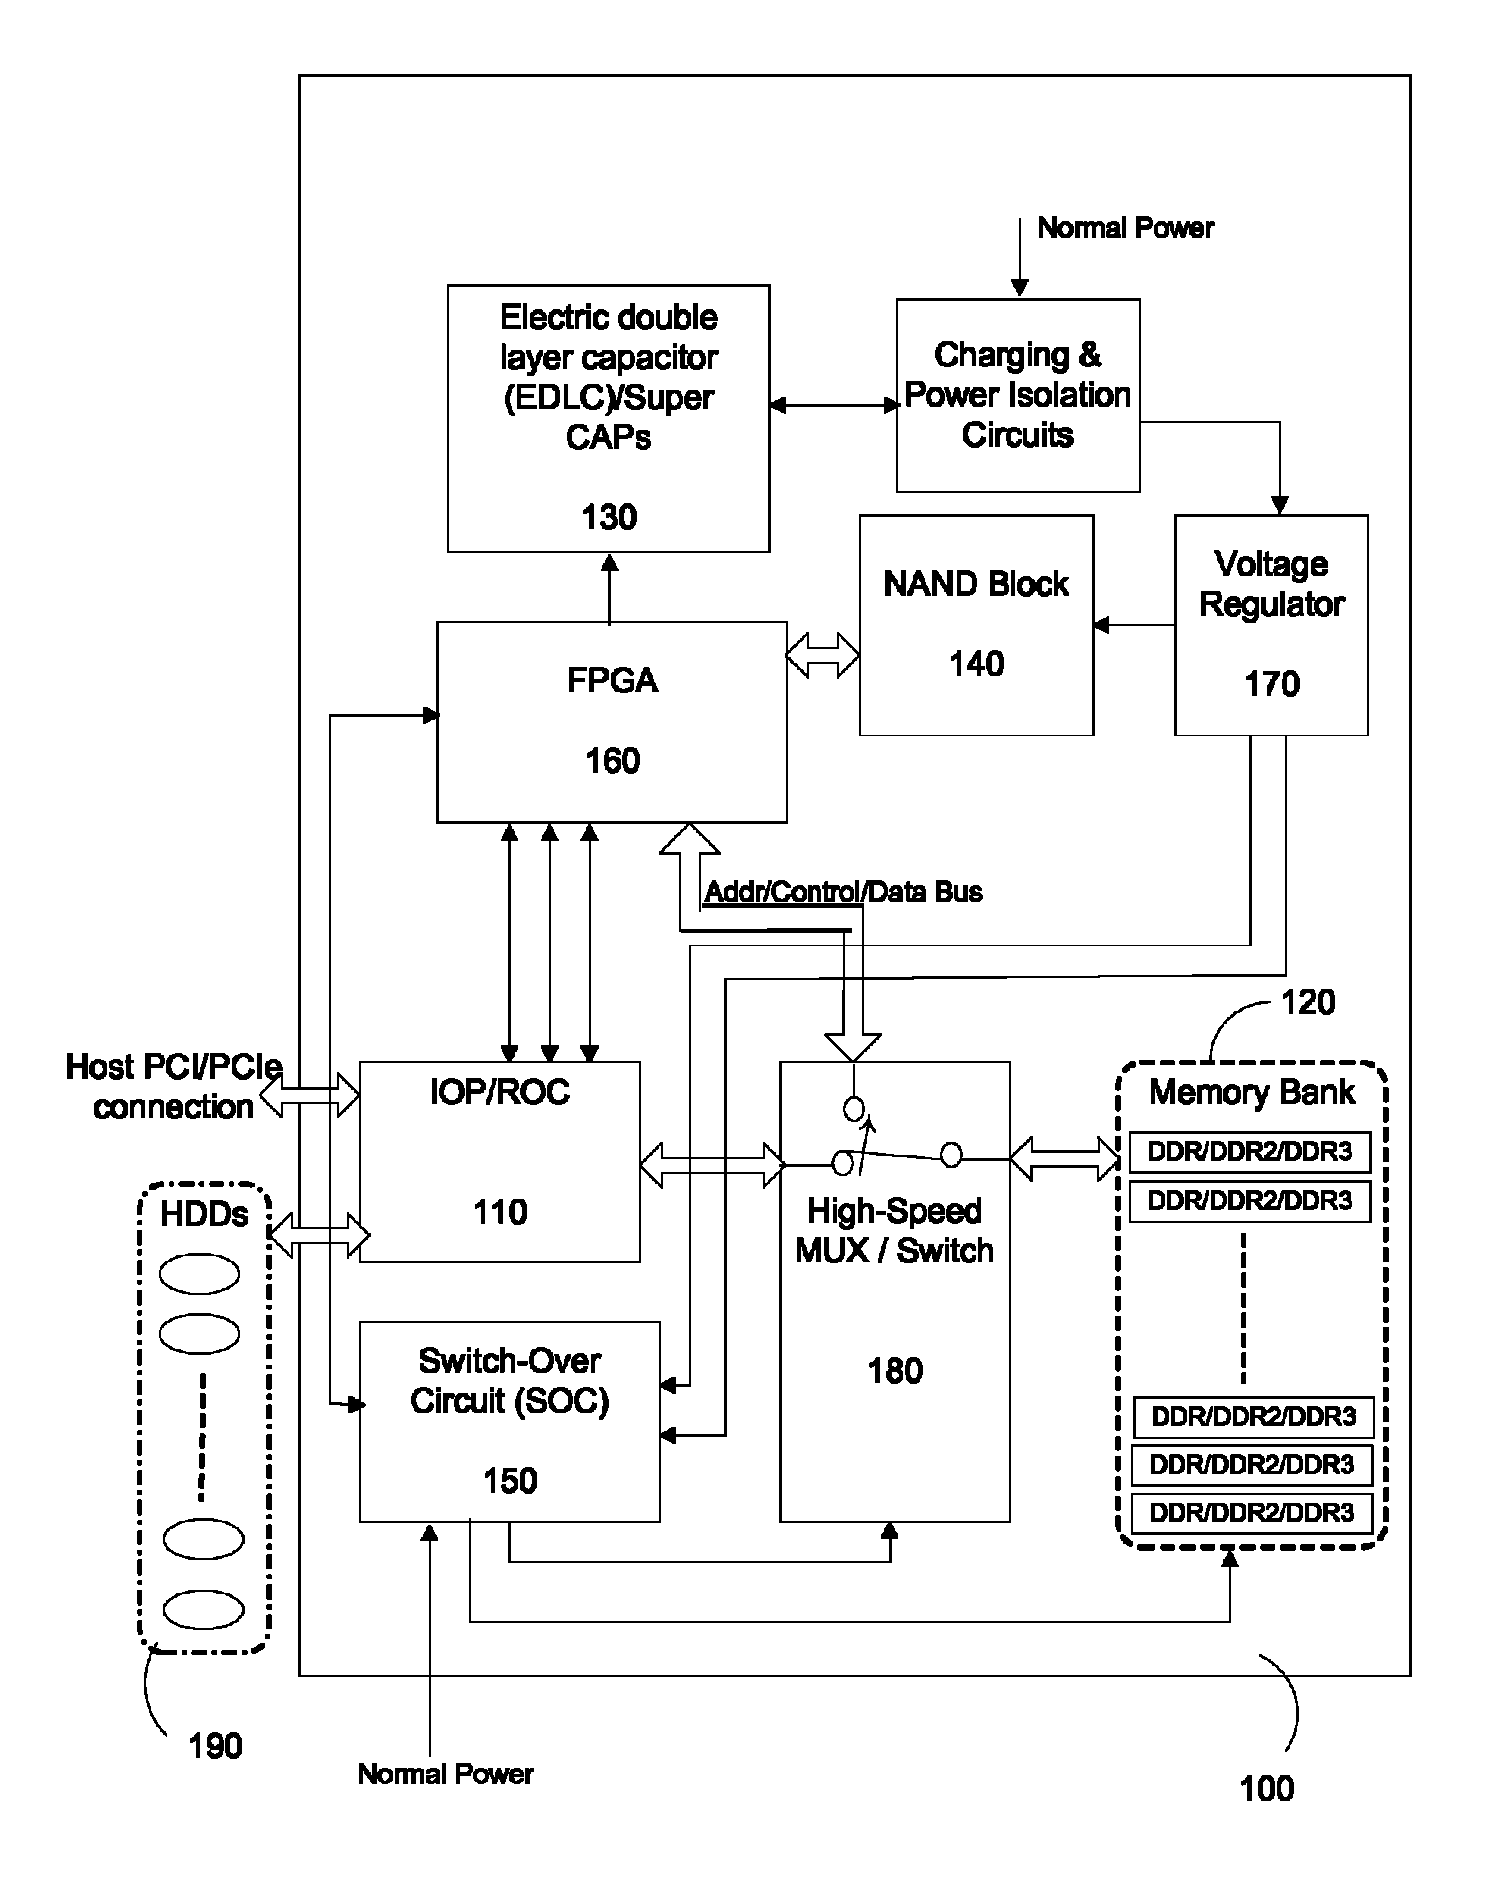 Method and apparatus for archiving data during unexpected power loss